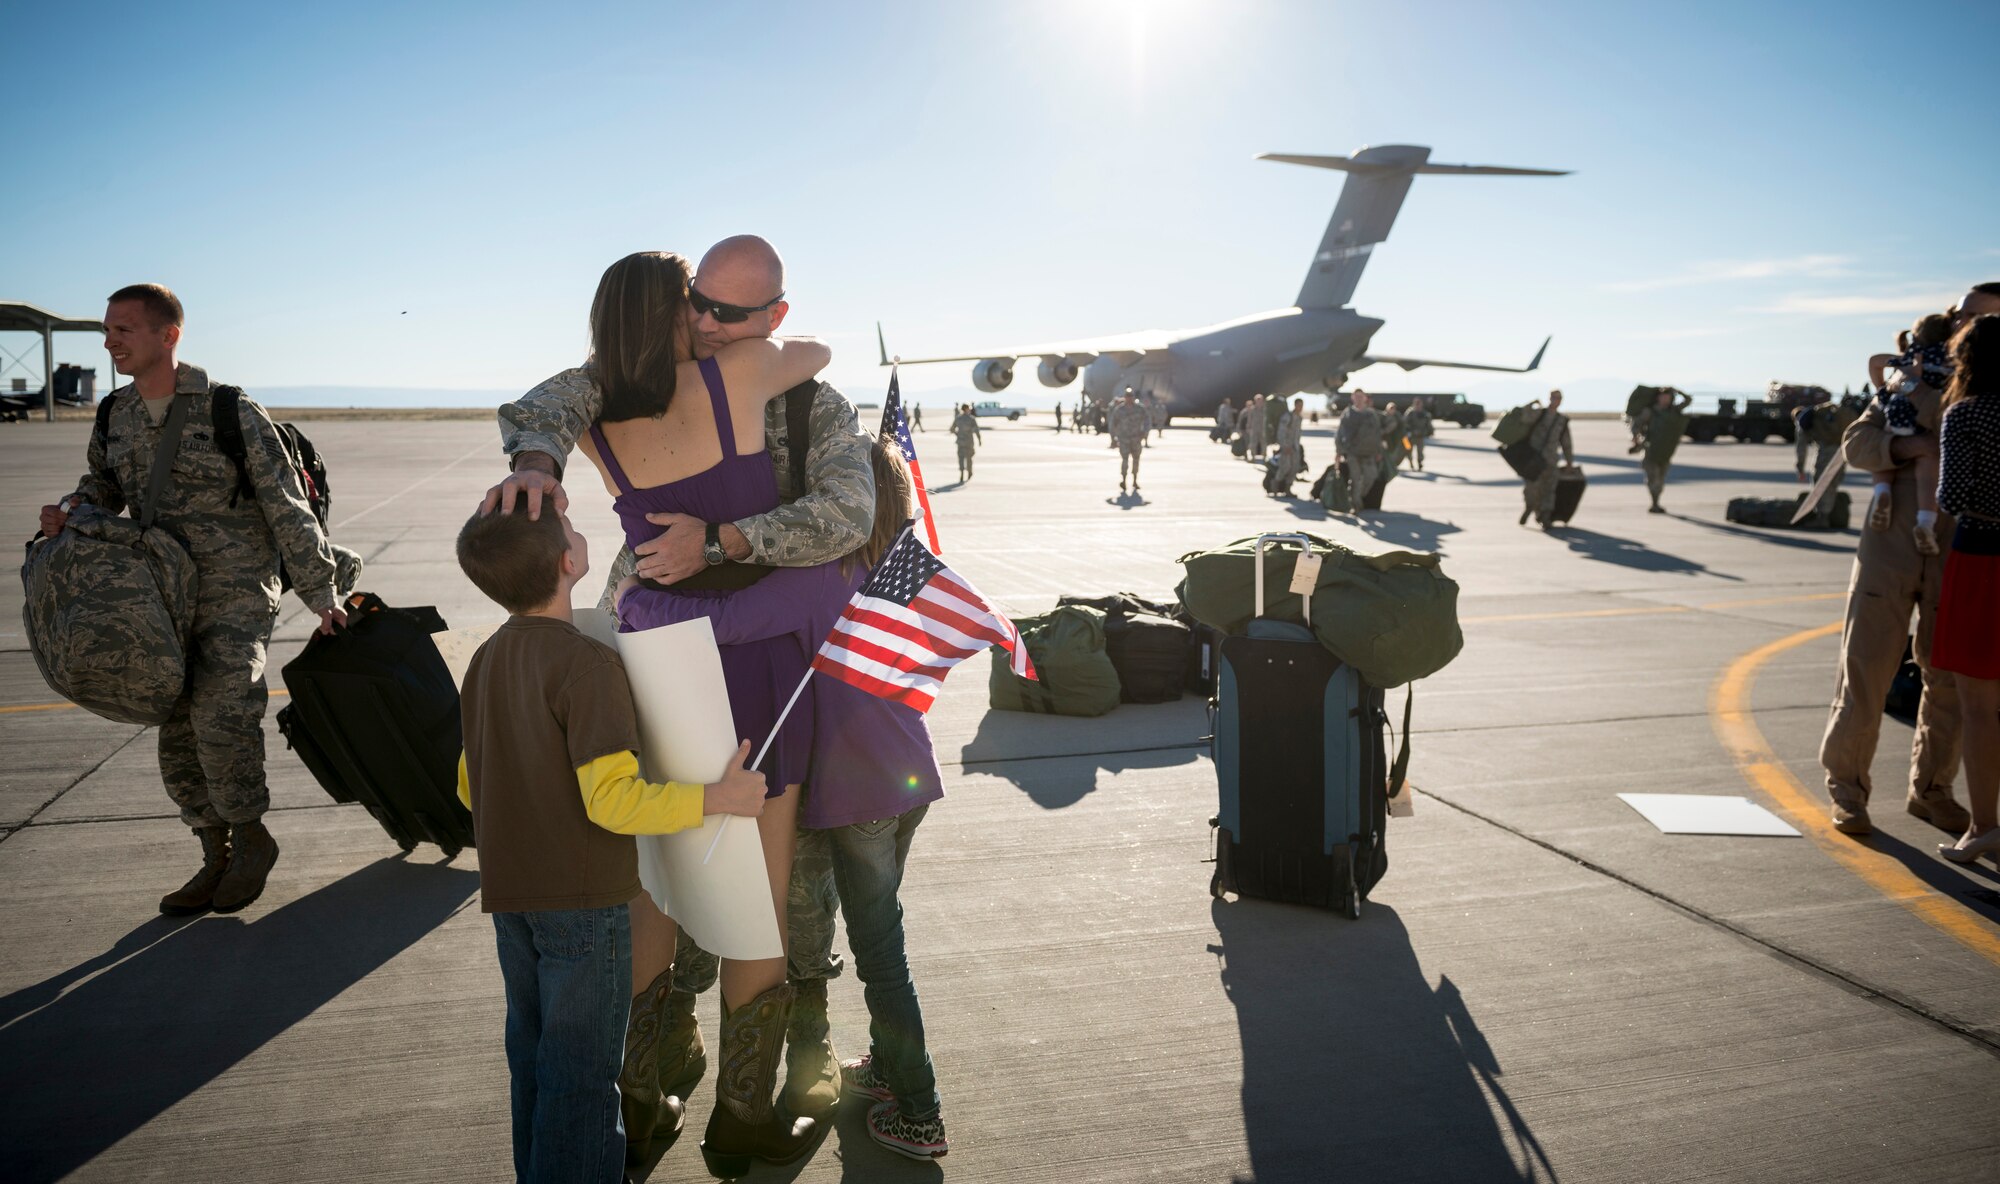 U.S. Air Force 1st Lt. Steven Draughon, 366th Aircraft Maintenance Squadron, reunites with his family at Mountain Home Air Force Base, Idaho, Oct. 5, 2013. Draughon was deployed to Southwest Asia and had just returned that day. (U.S. Air Force photo by Tech. Sgt. Samuel Morse/RELEASED)